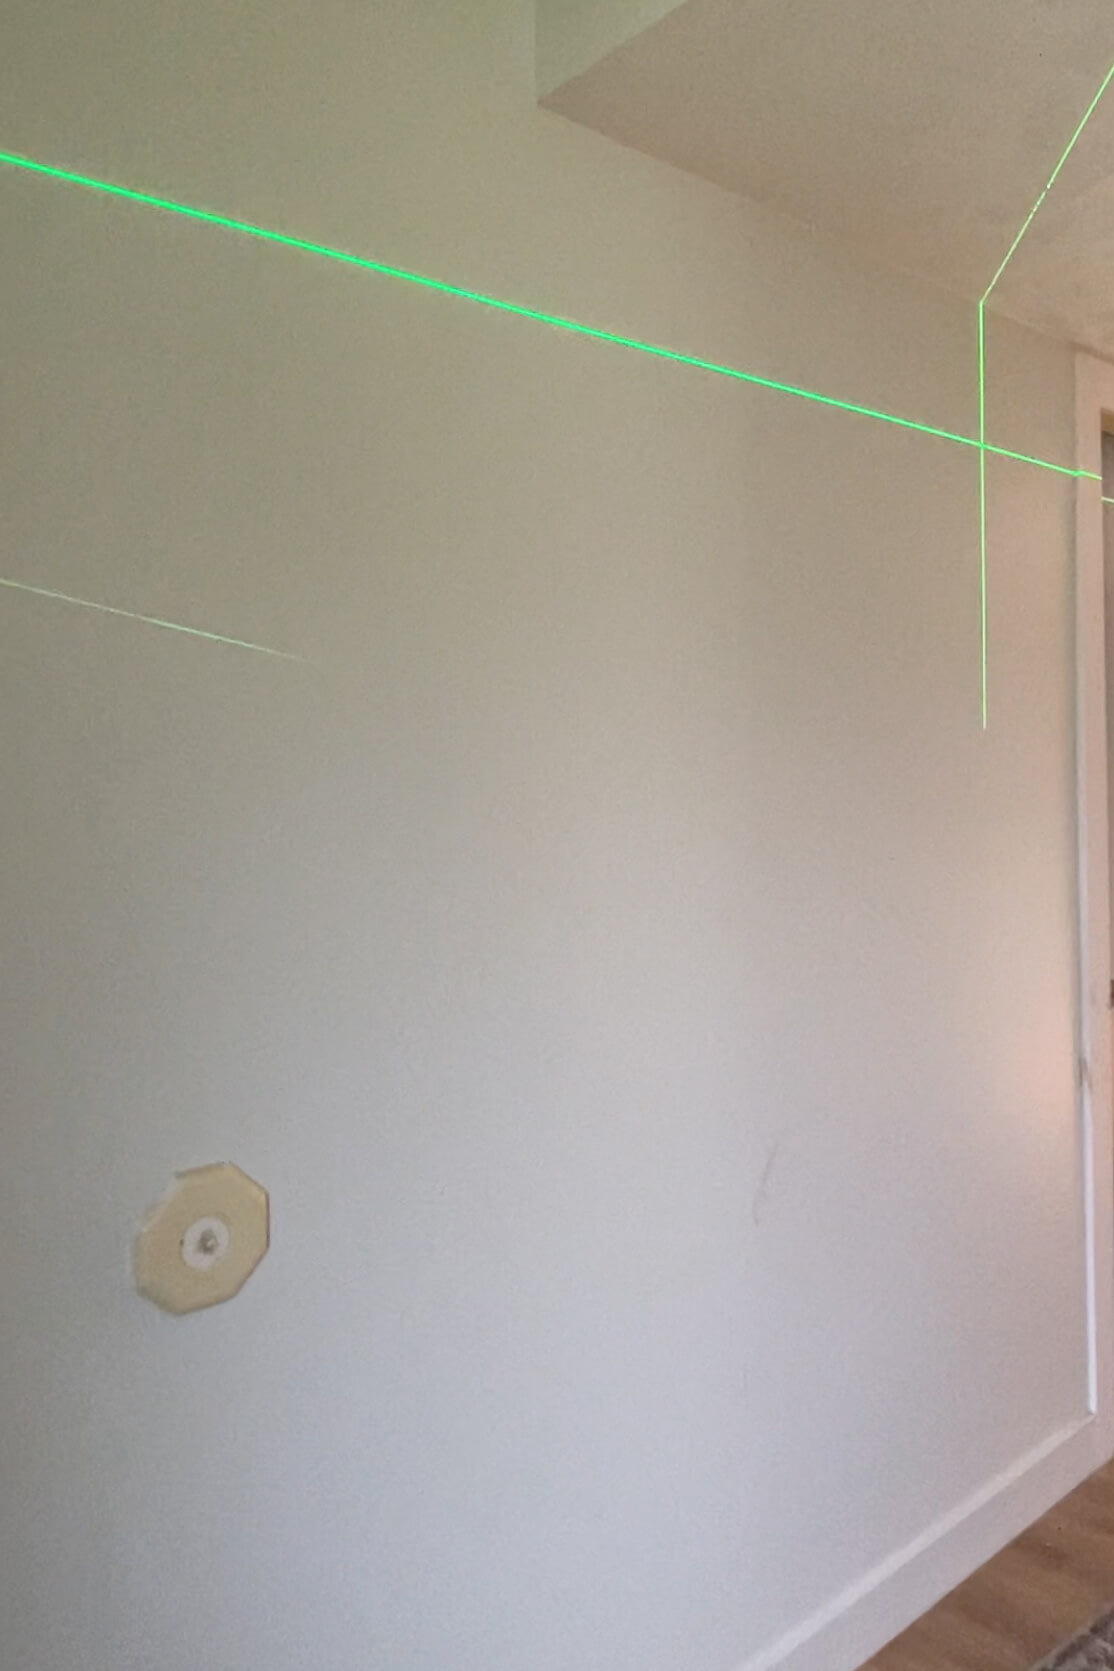 Using a laser level to hang a gallery wall evenly.